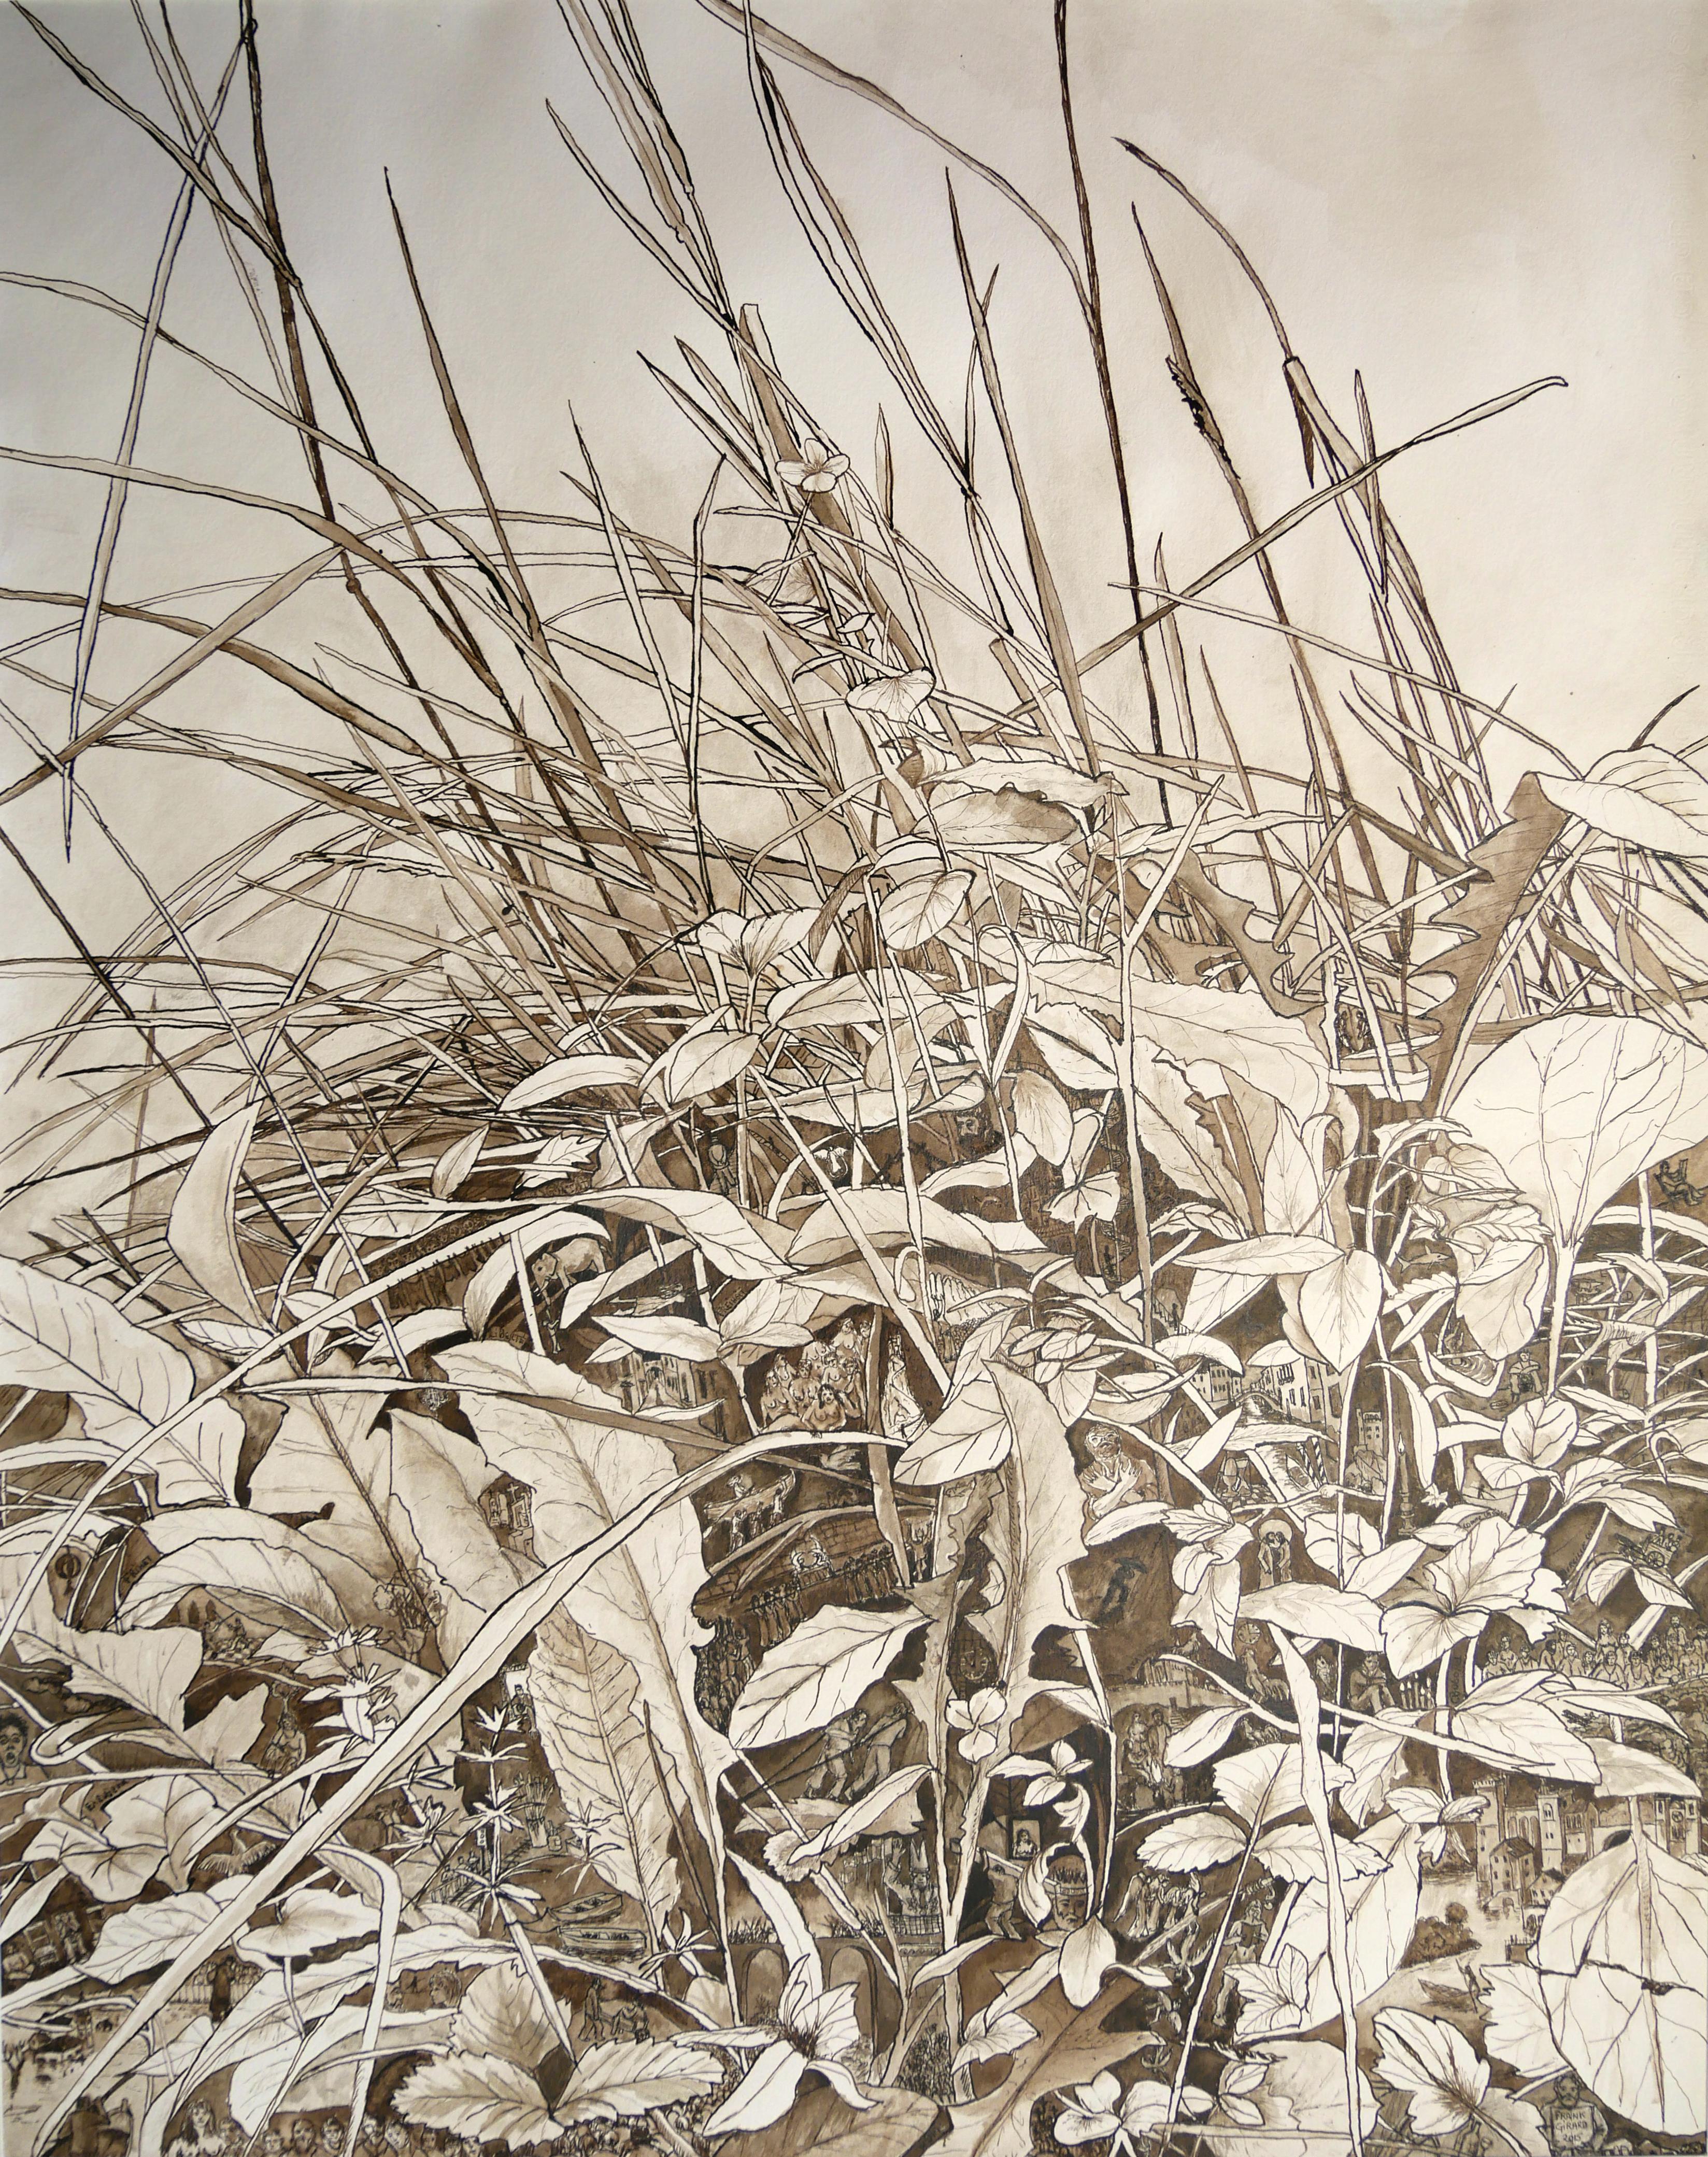 Frank Girard Figurative Art - "Wind in the Grass" Inhabited by Human, Chinese Ink and Wash Drawing on Paper 